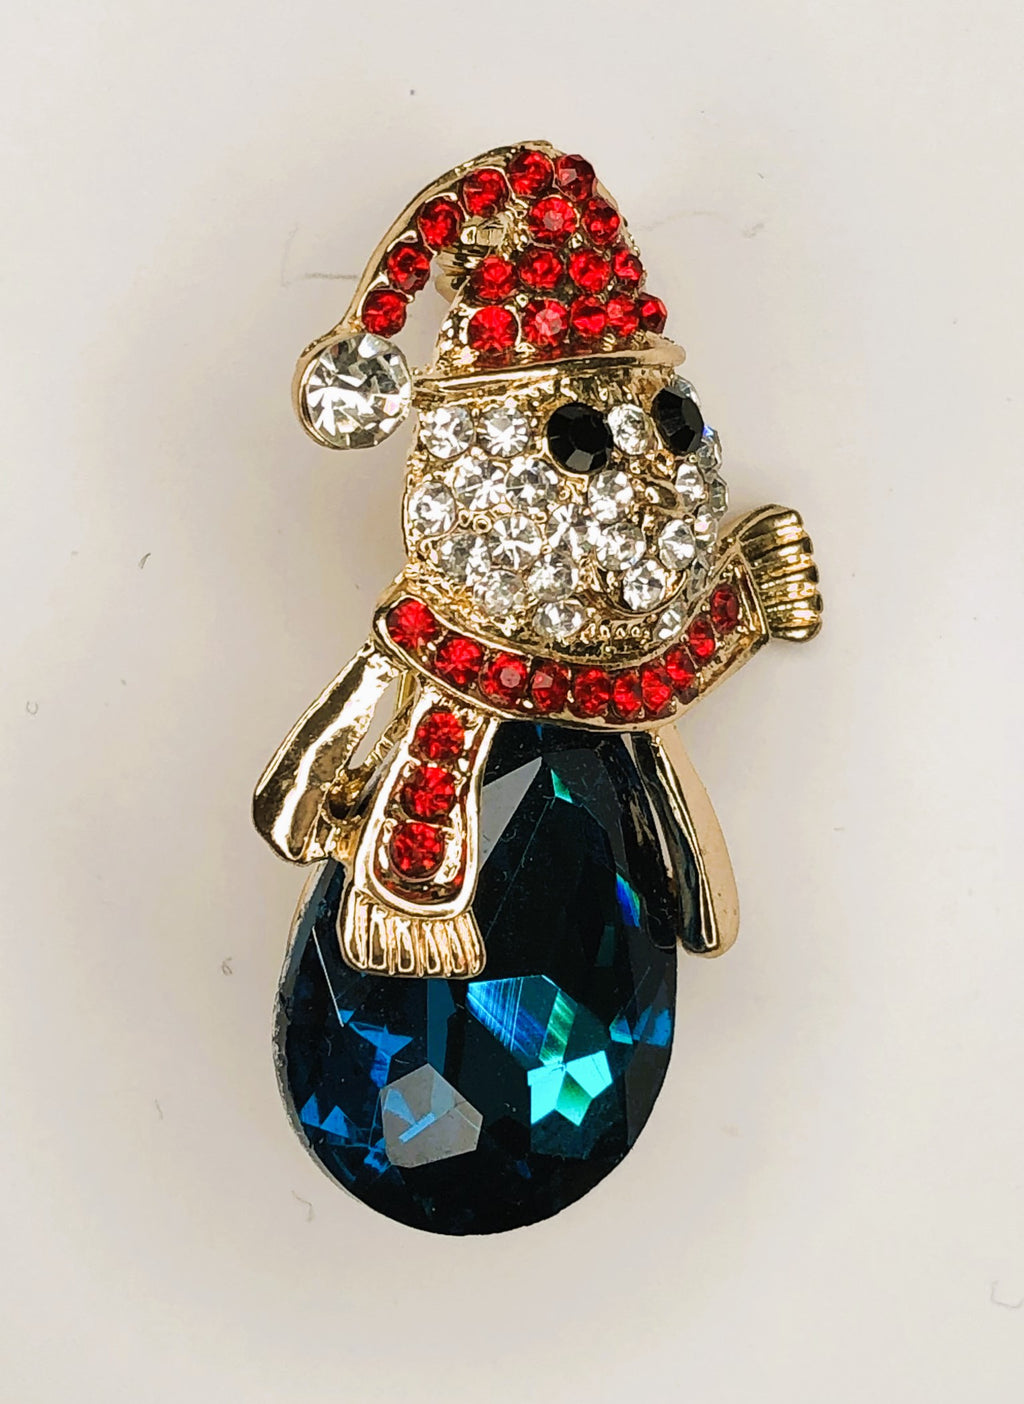 Snowman head with scarf and cap on blue stone brooch at erika